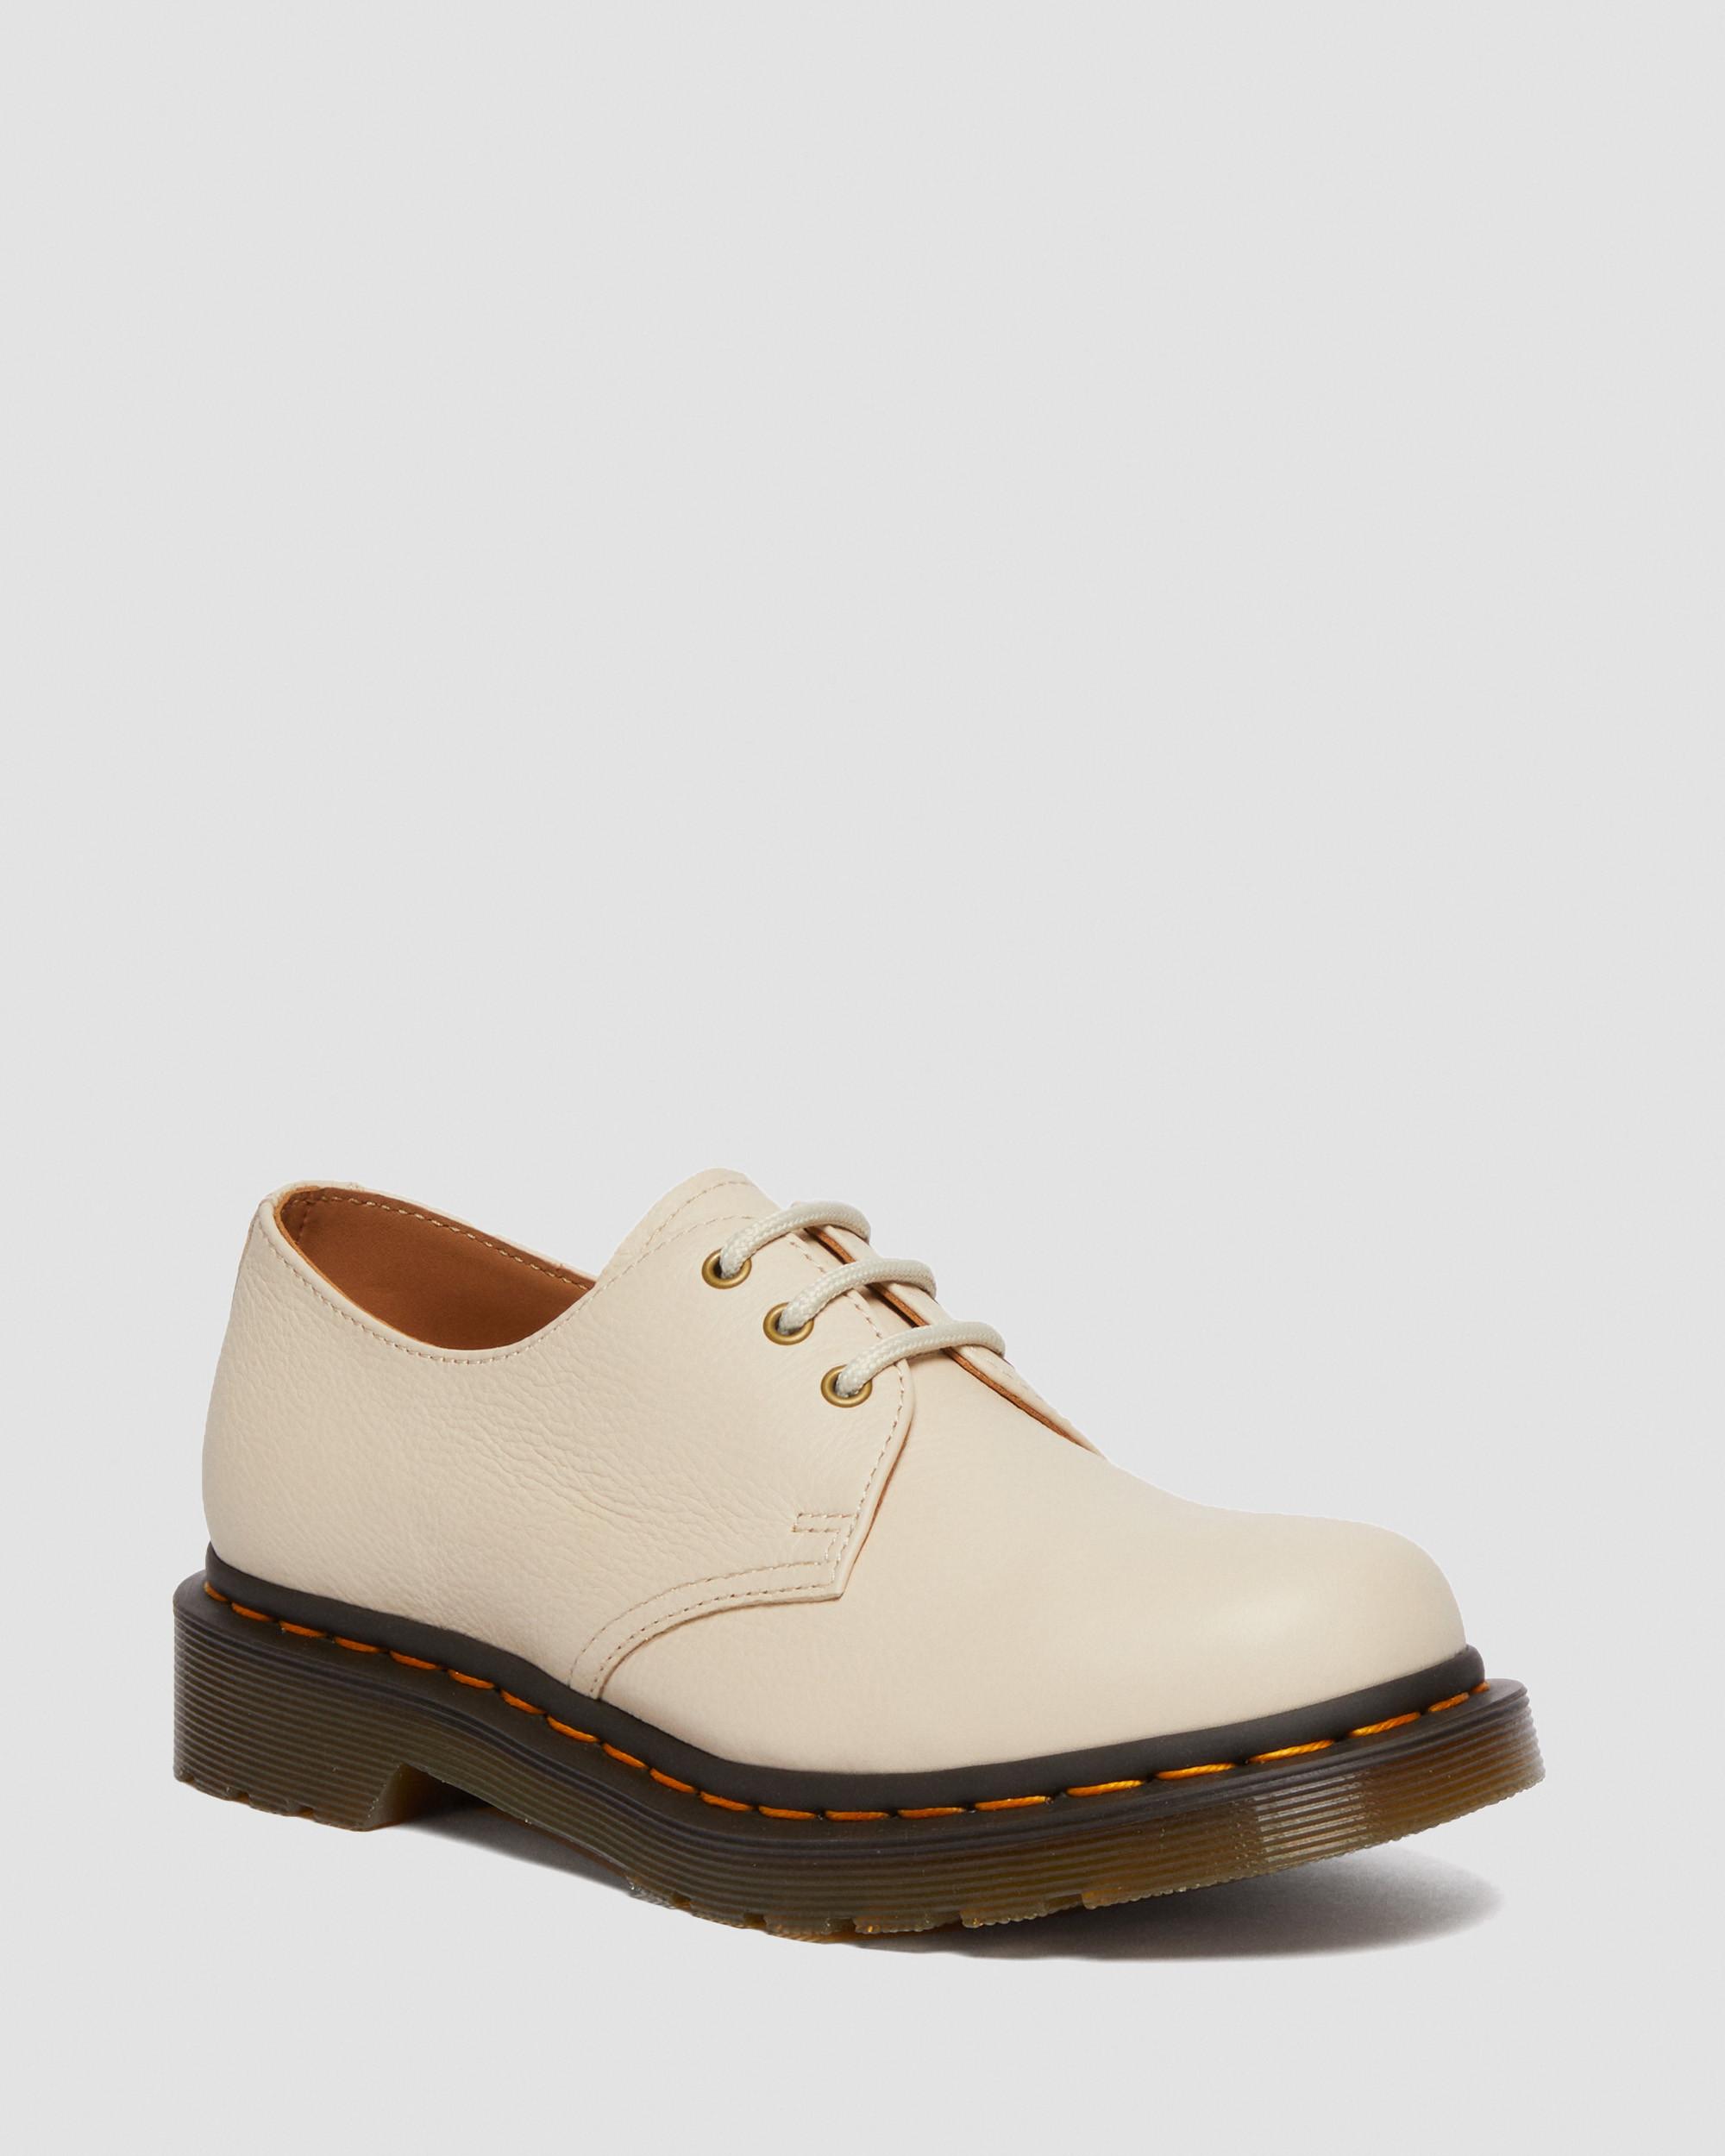 1461 Virginia Leather Oxford Shoes in Parchment Beige | Dr. Martens